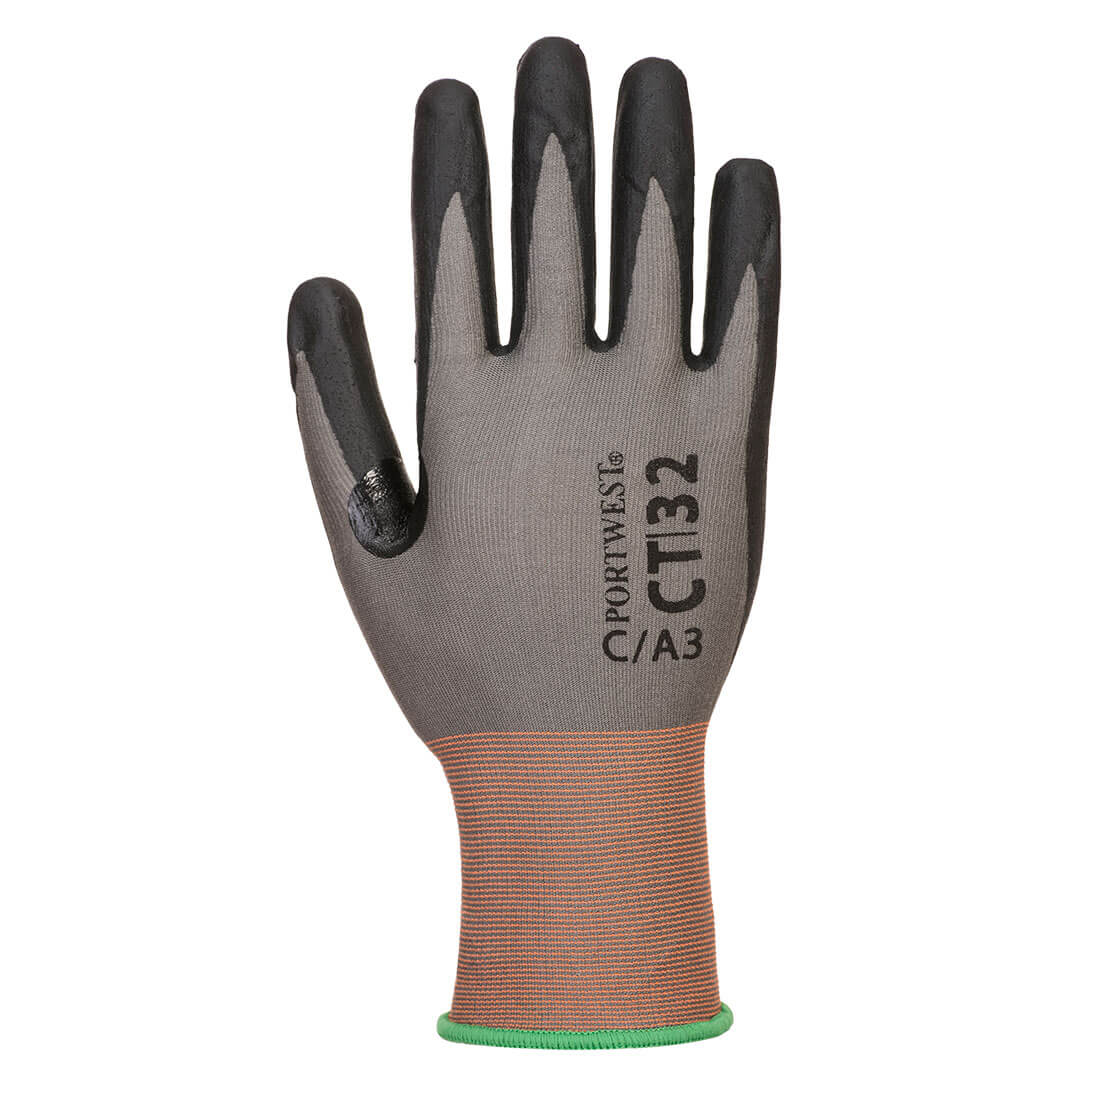 CT32  Portwest® CT MR18 A3 Cut Resistant Seamless Knit Micro Foam Nitrile Coated Work Gloves